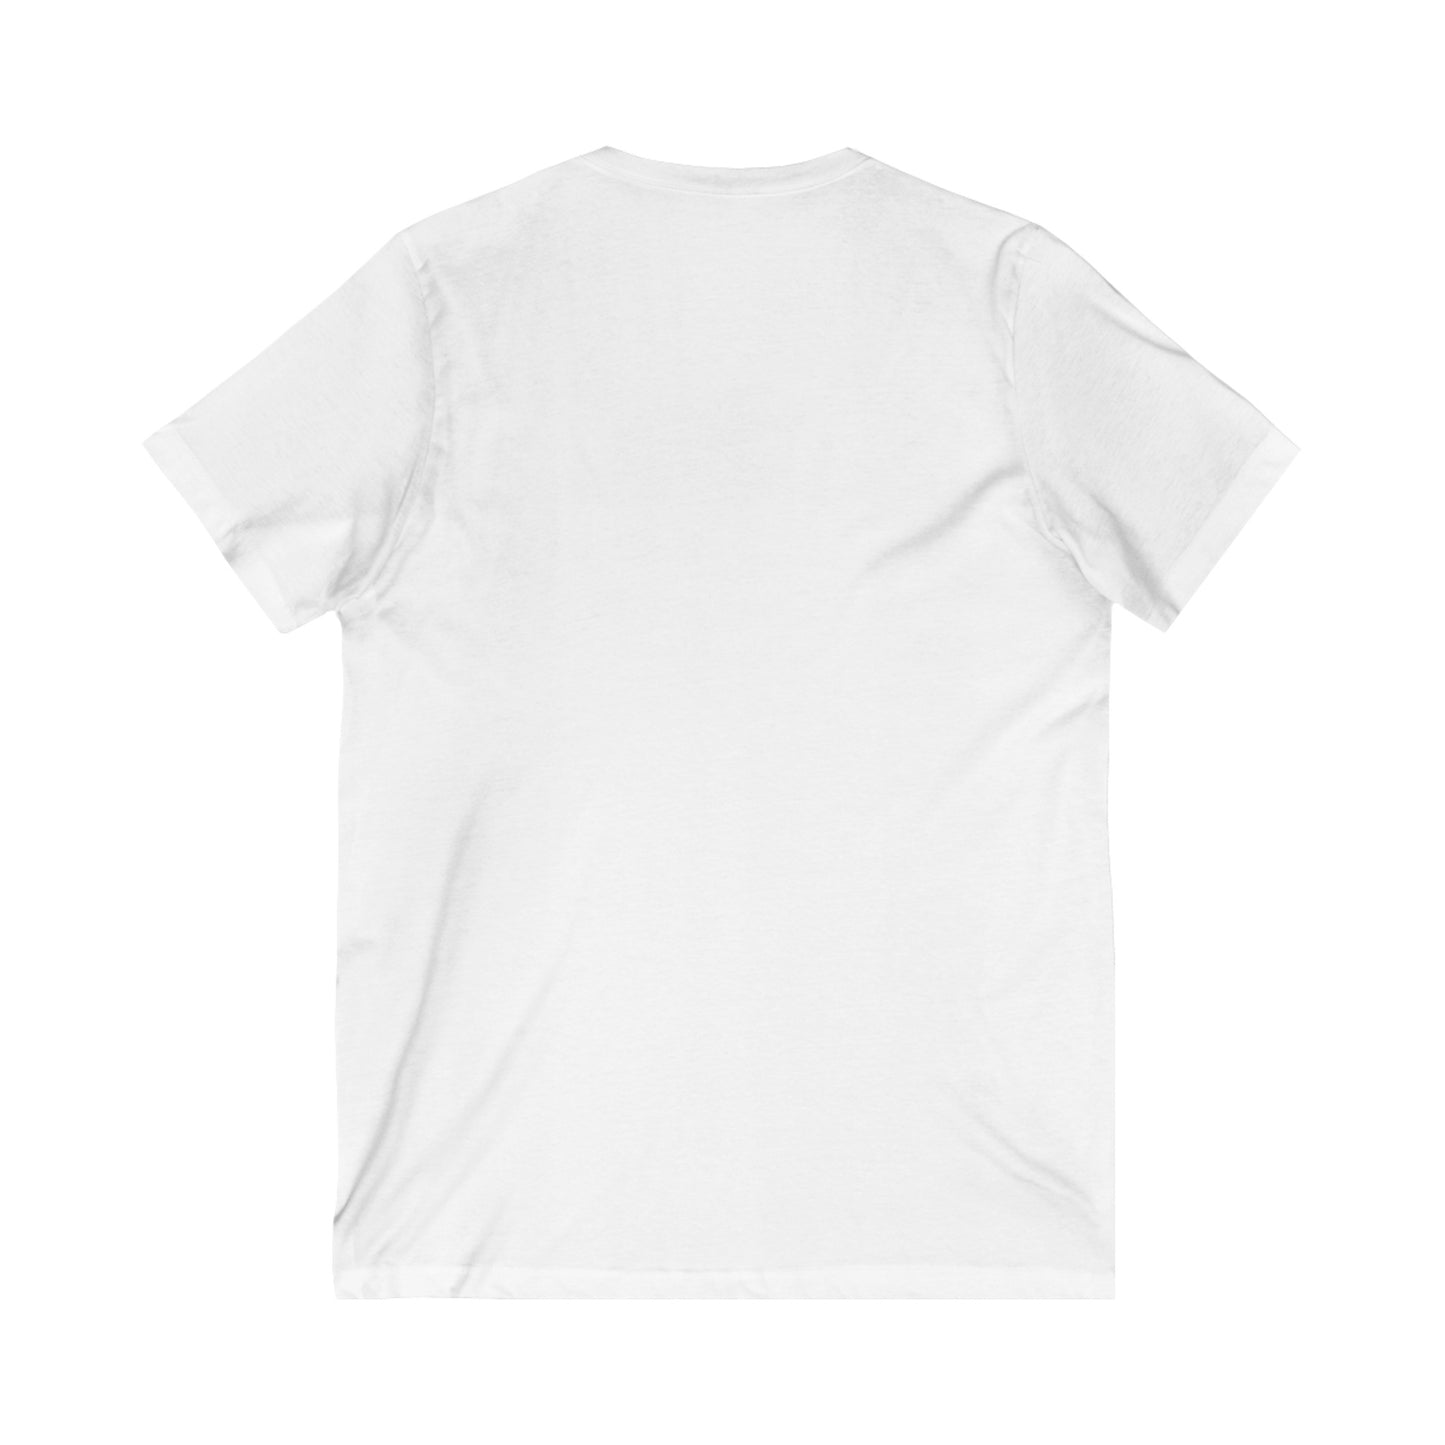 I'm the Soap Lady they told you about Short Sleeve V-Neck Tee